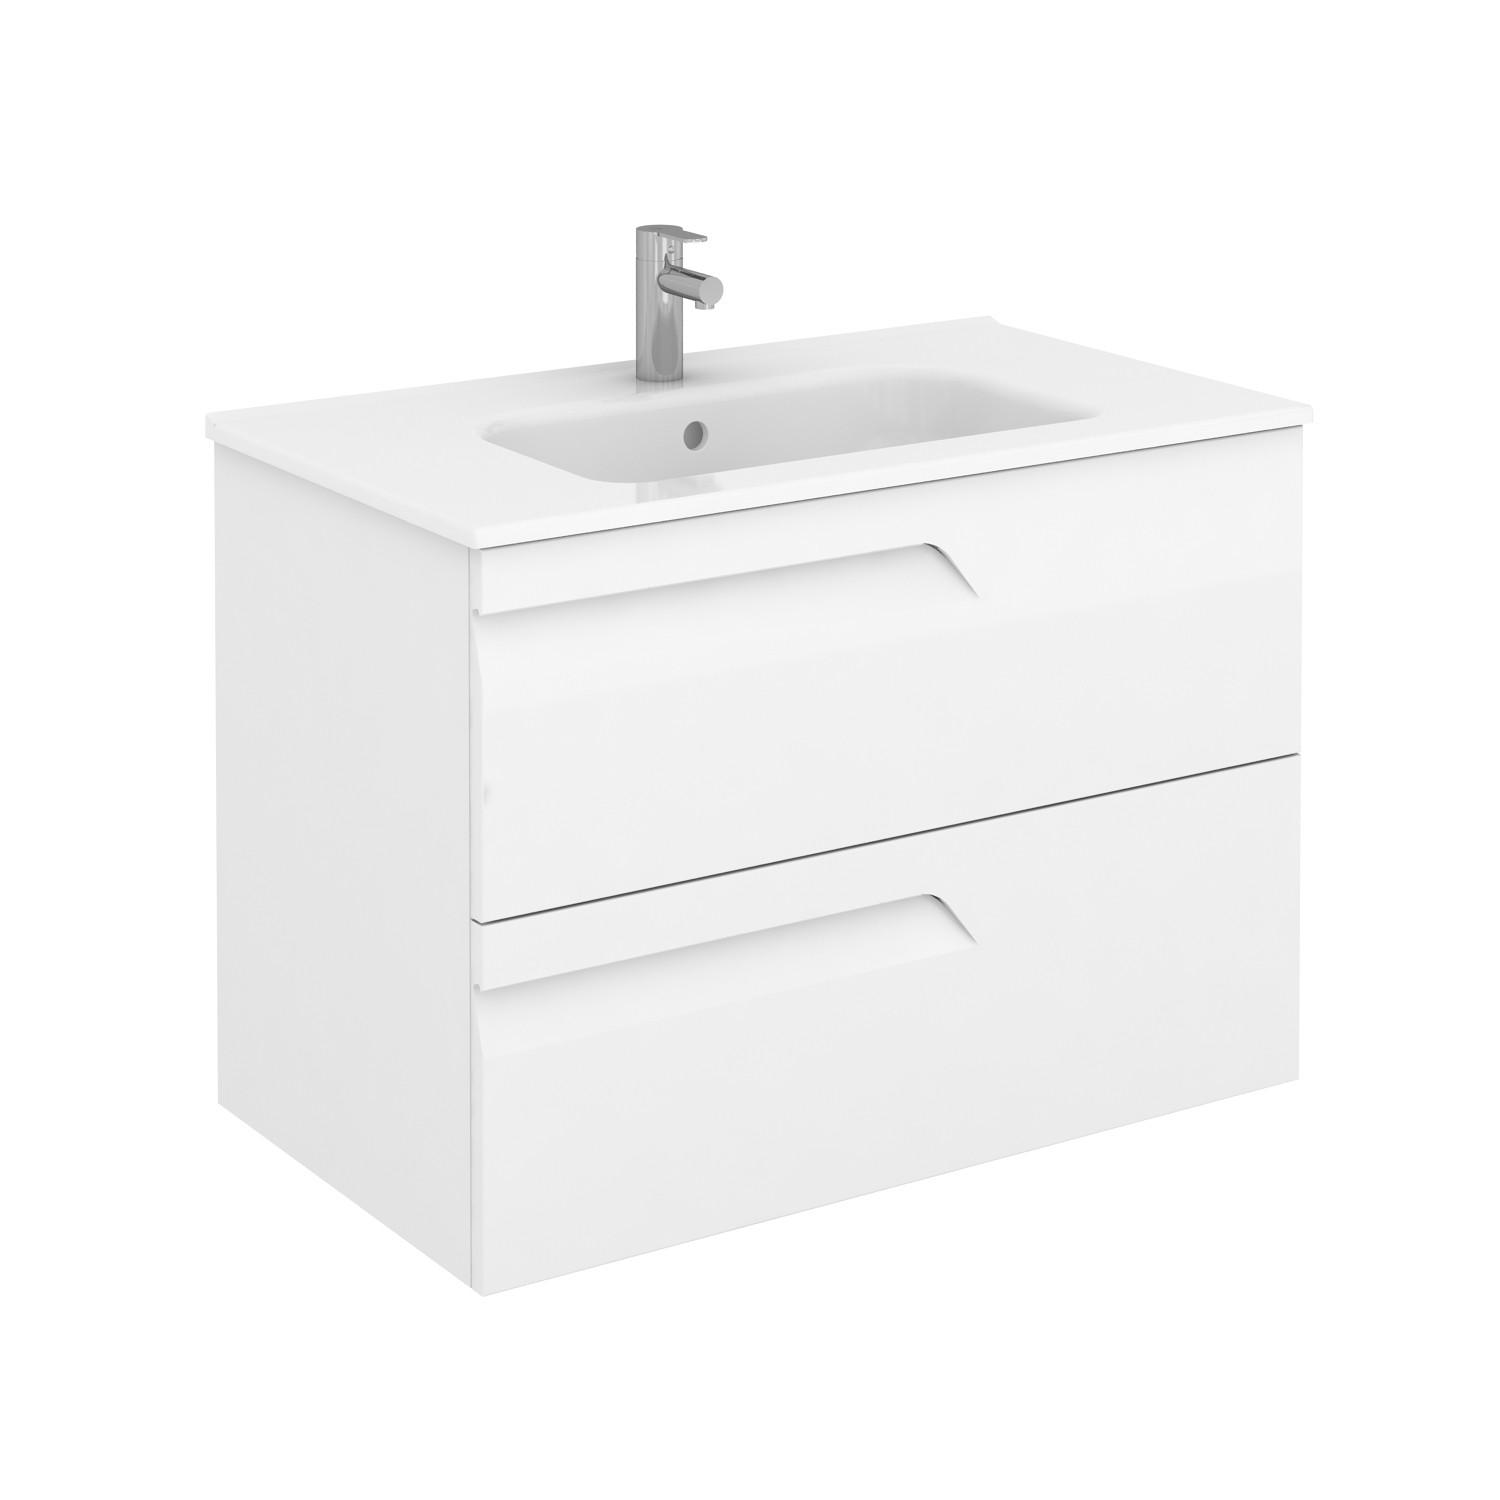 Vitale 800mm 2 Drawer Wall Hung Vanity Unit With Square Basin White Gloss Frontlinebathroomscom